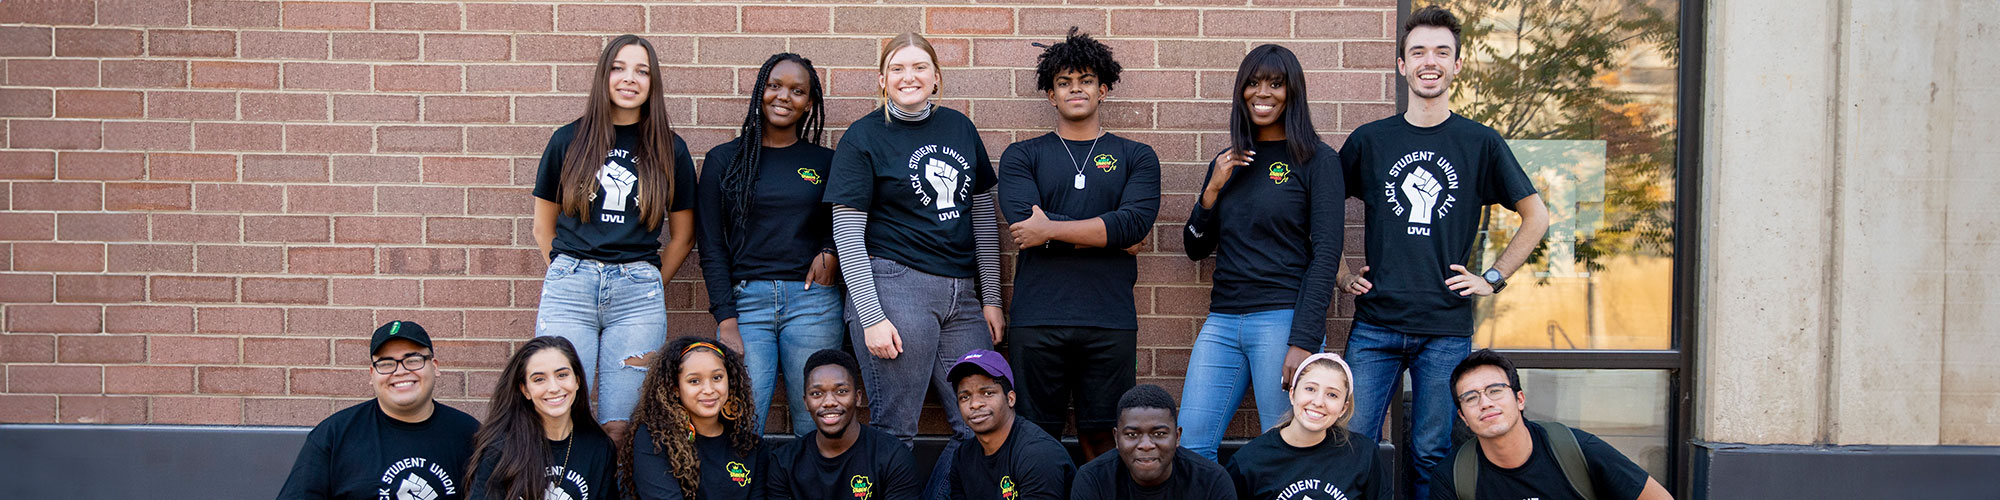 Members of UVU's Black Student Union posing for a picture